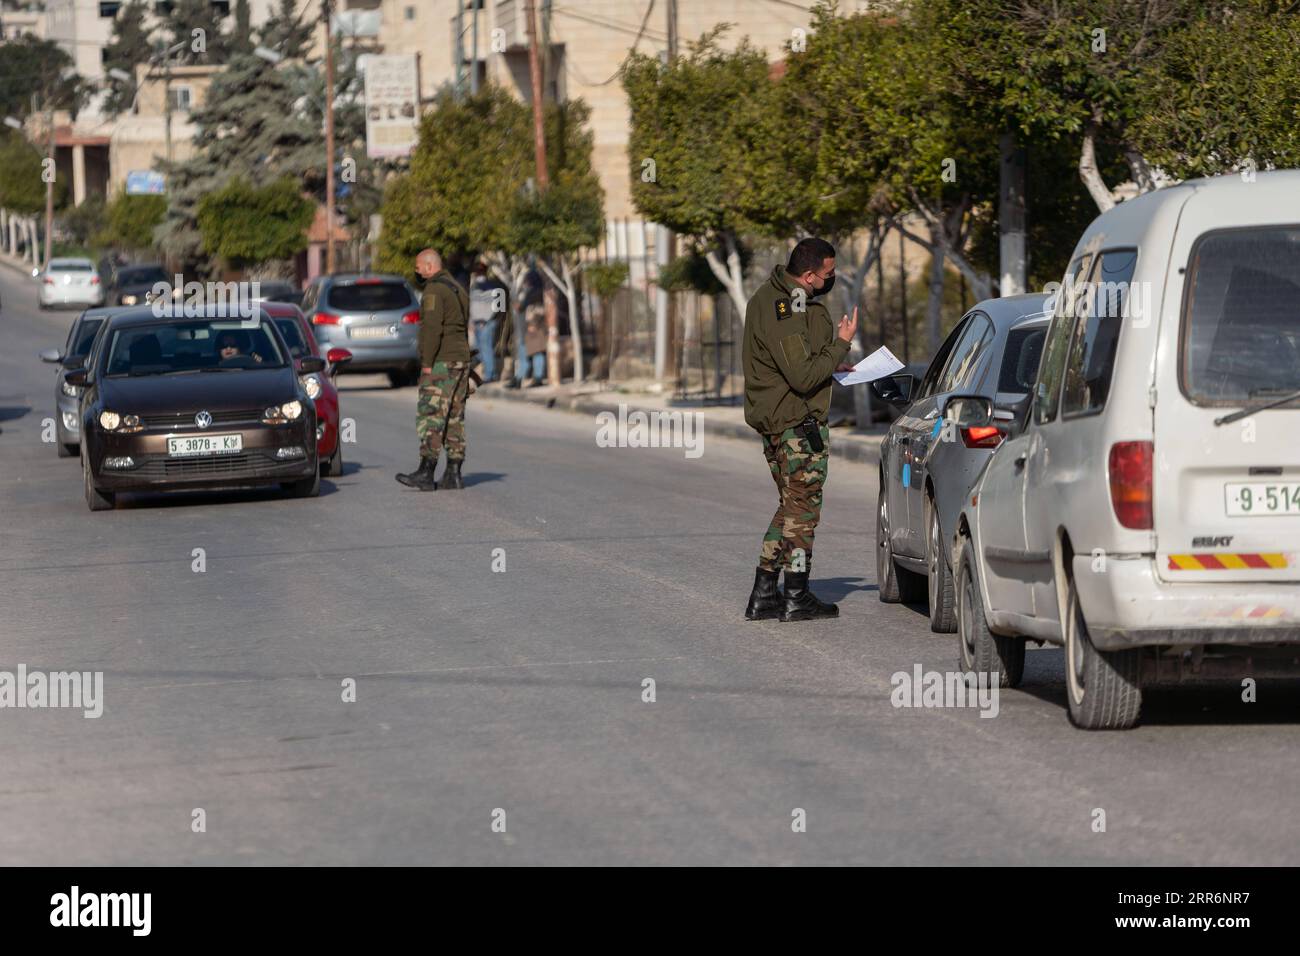 210224 -- BETHLEHEM, Feb. 24, 2021 -- Palestinian police officers work at a checkpoint at one of the main roads of Beit Sahour near the West Bank city Bethlehem, Feb. 24, 2021. The Governor of Bethlehem announced the closure of Beit Sahour for 48-hours starting from 12:00 am Wednesday, after increase of the numbers of COVID-19 infections. Photo by /Xinhua MIDEAST-BETHLEHEM-COVID-19-CHECKPOINT LuayxSababa PUBLICATIONxNOTxINxCHN Stock Photo